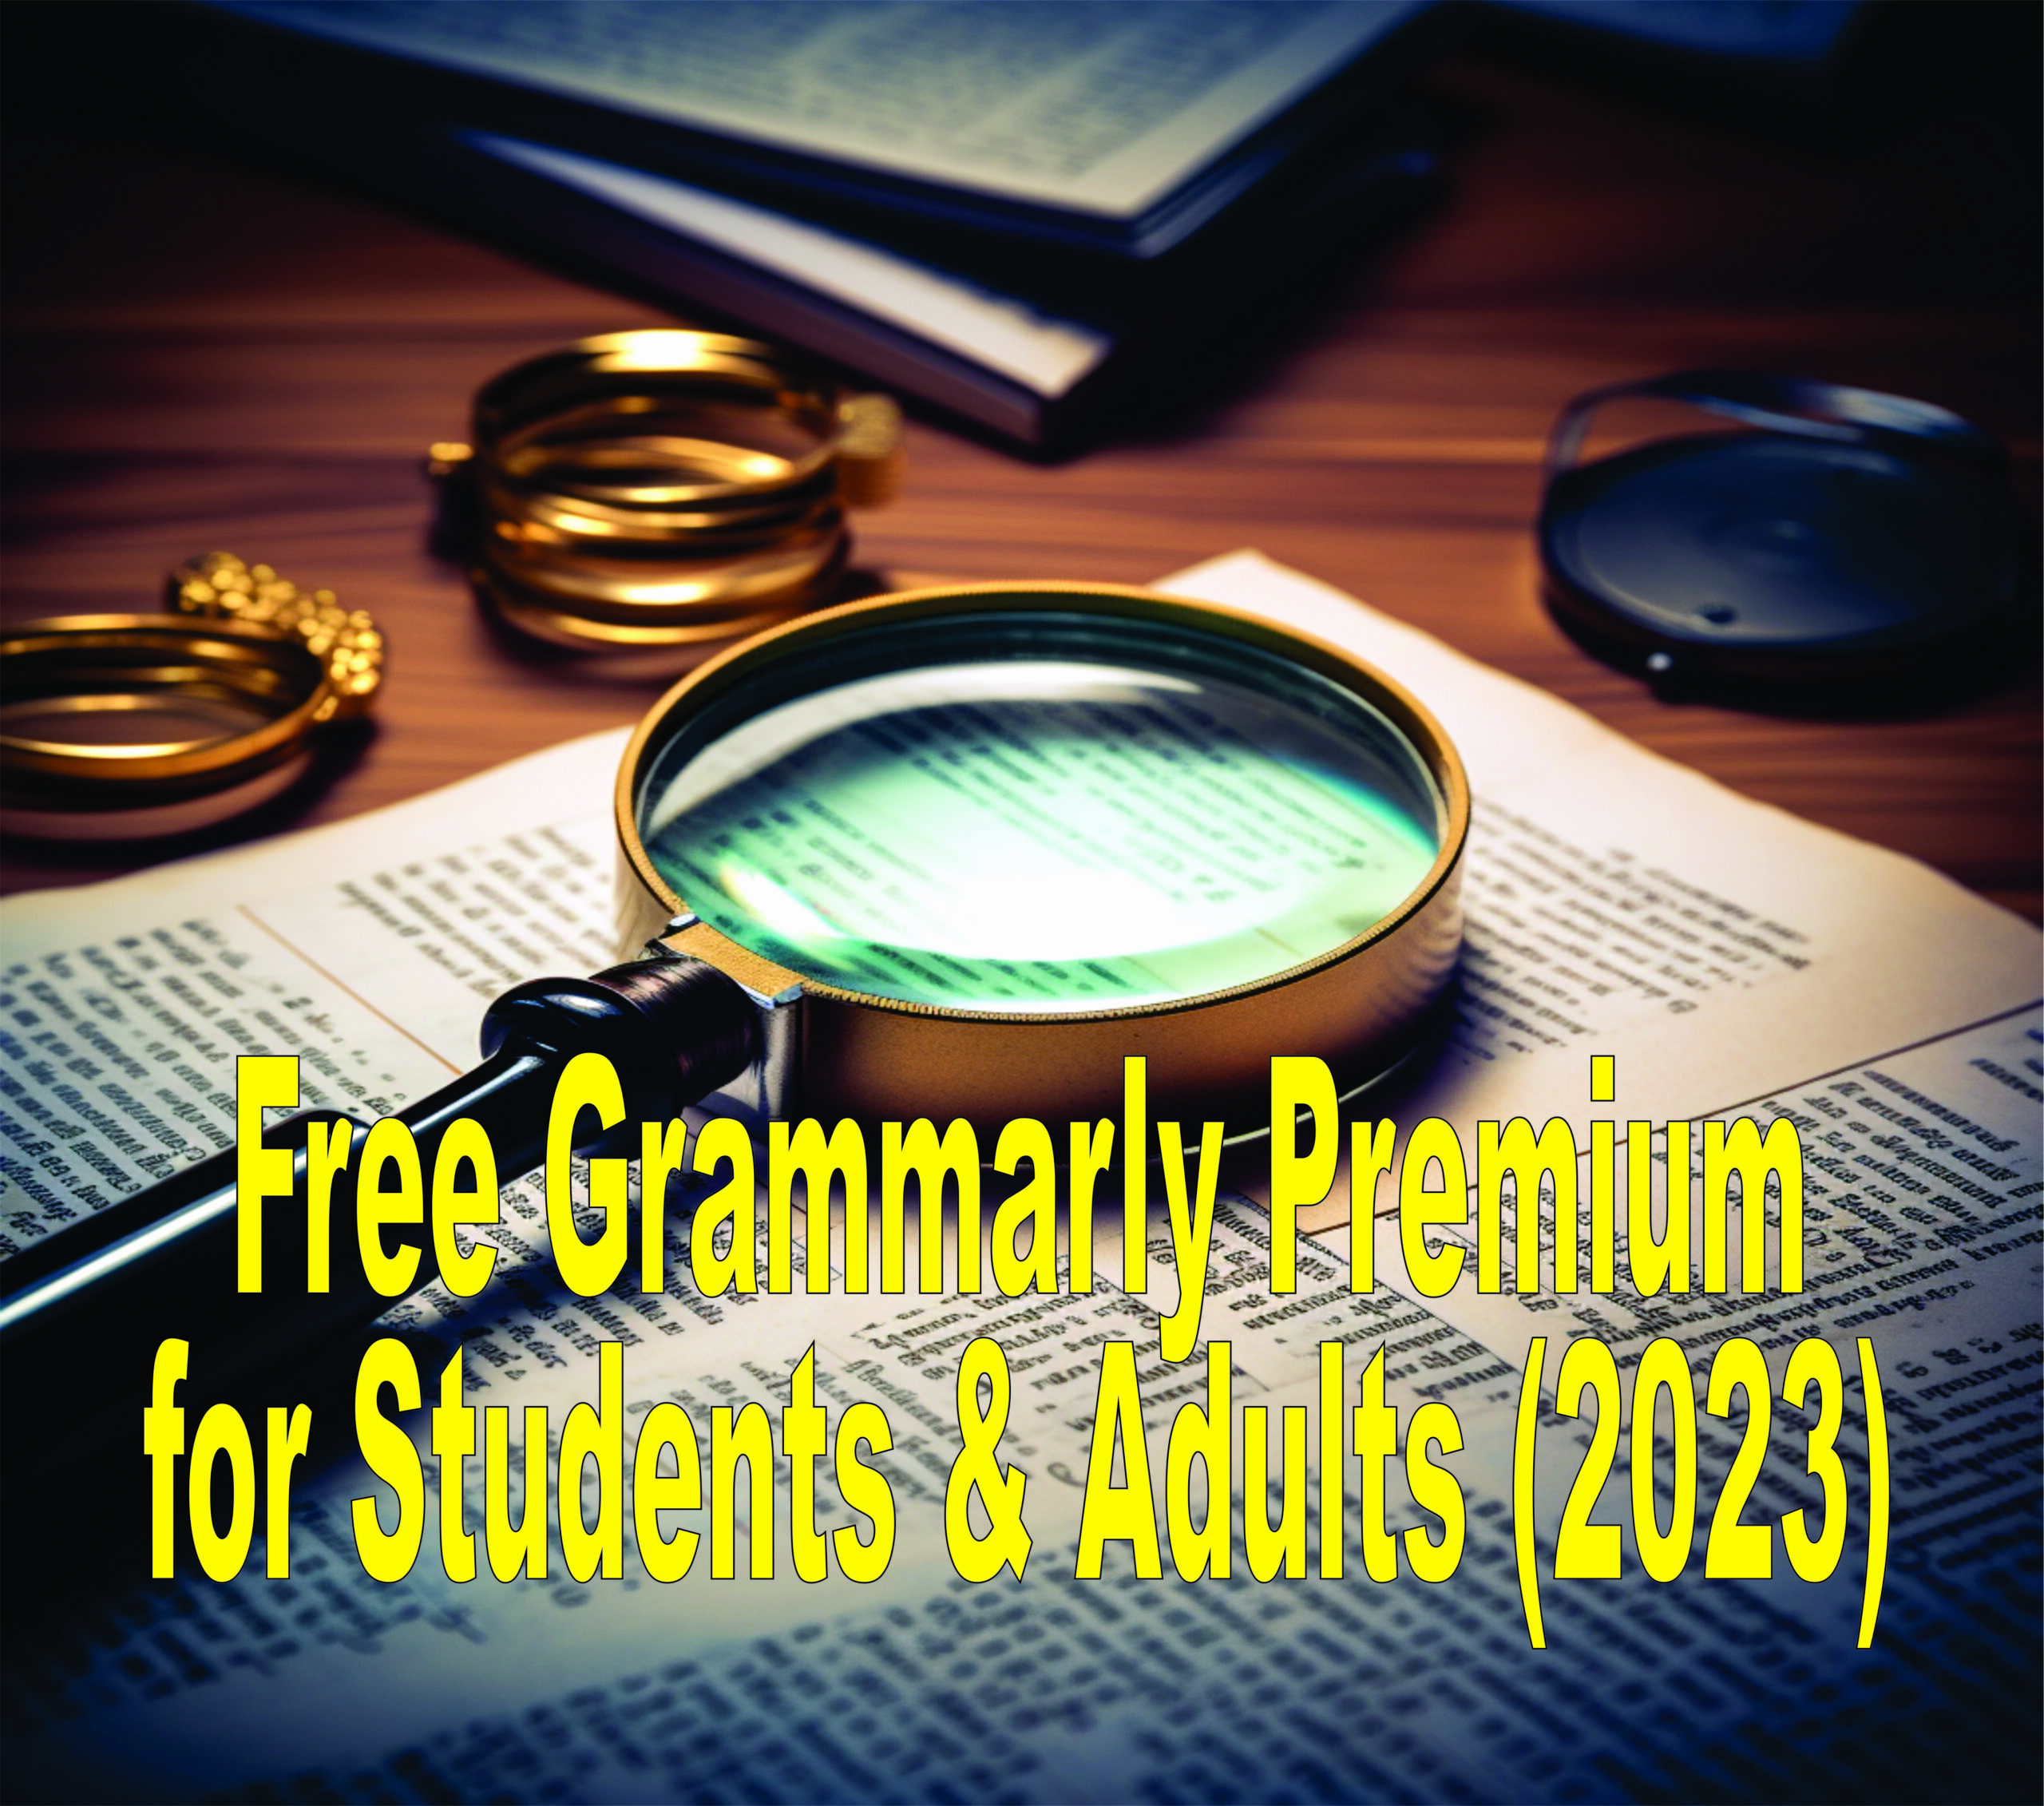 Free Grammarly Premium For Students & Adults (2023)